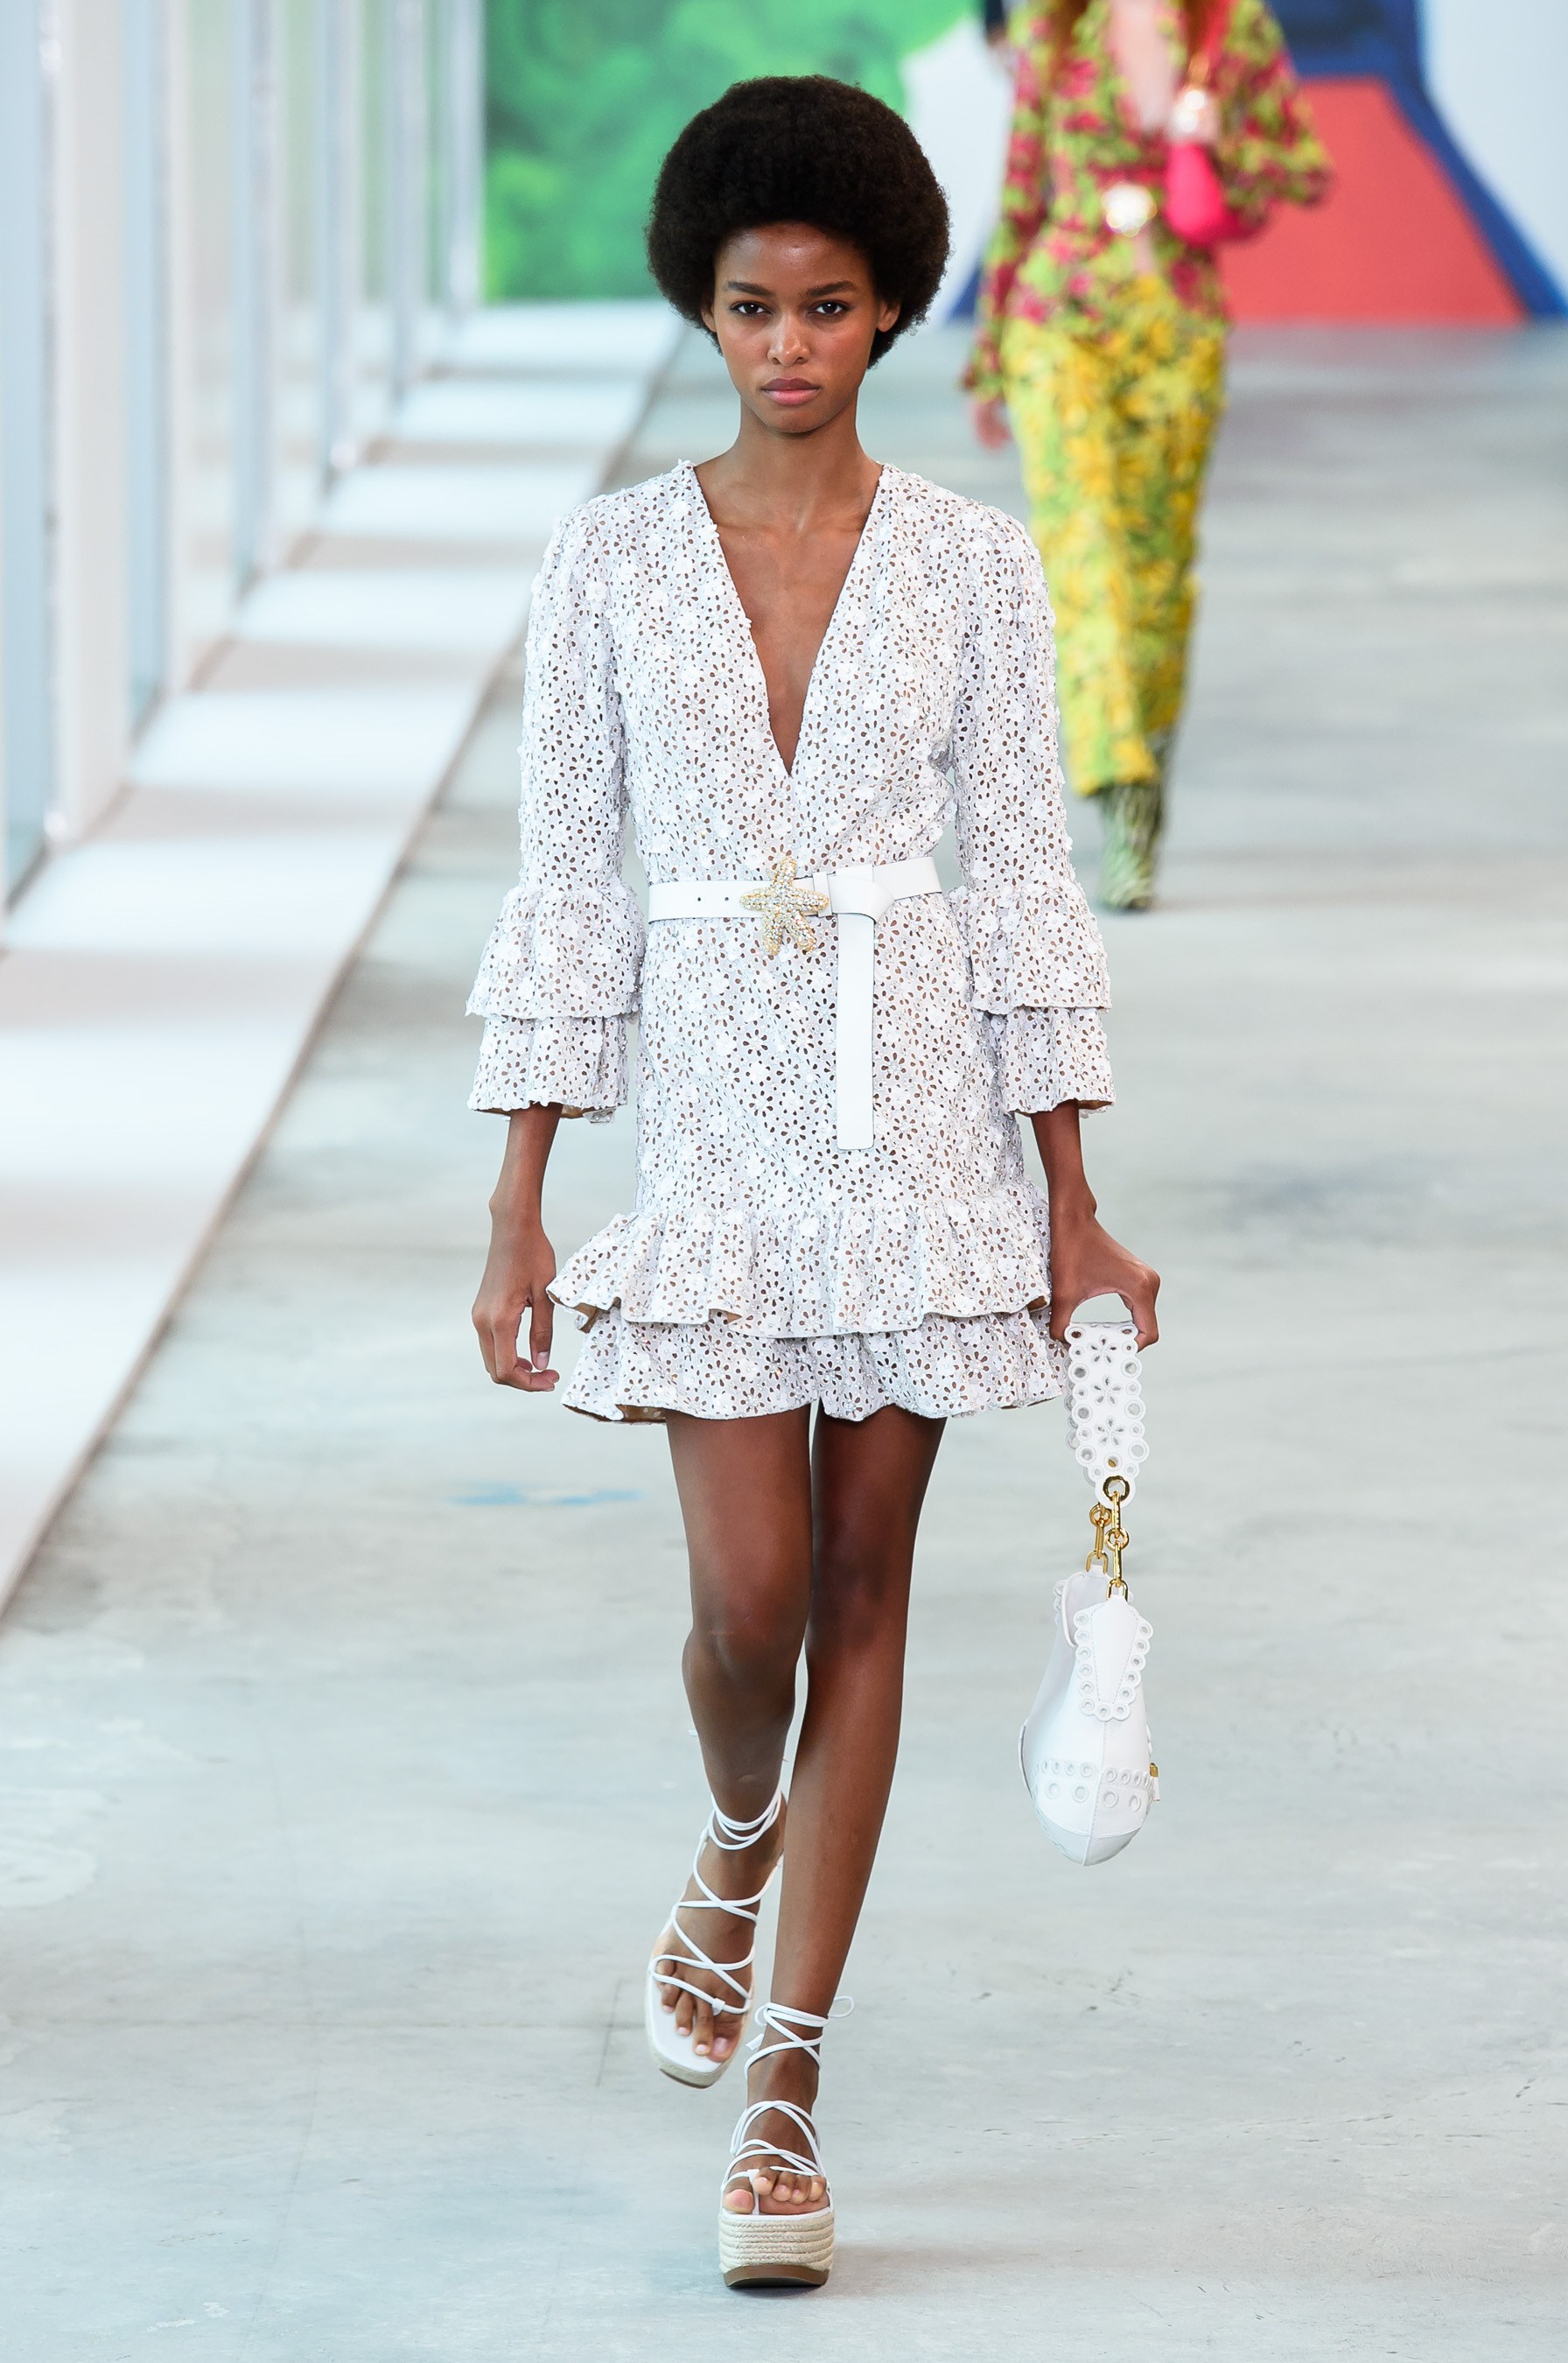 Top 10 New York Spring 2019 Collections and Fashion Shows - The Impression